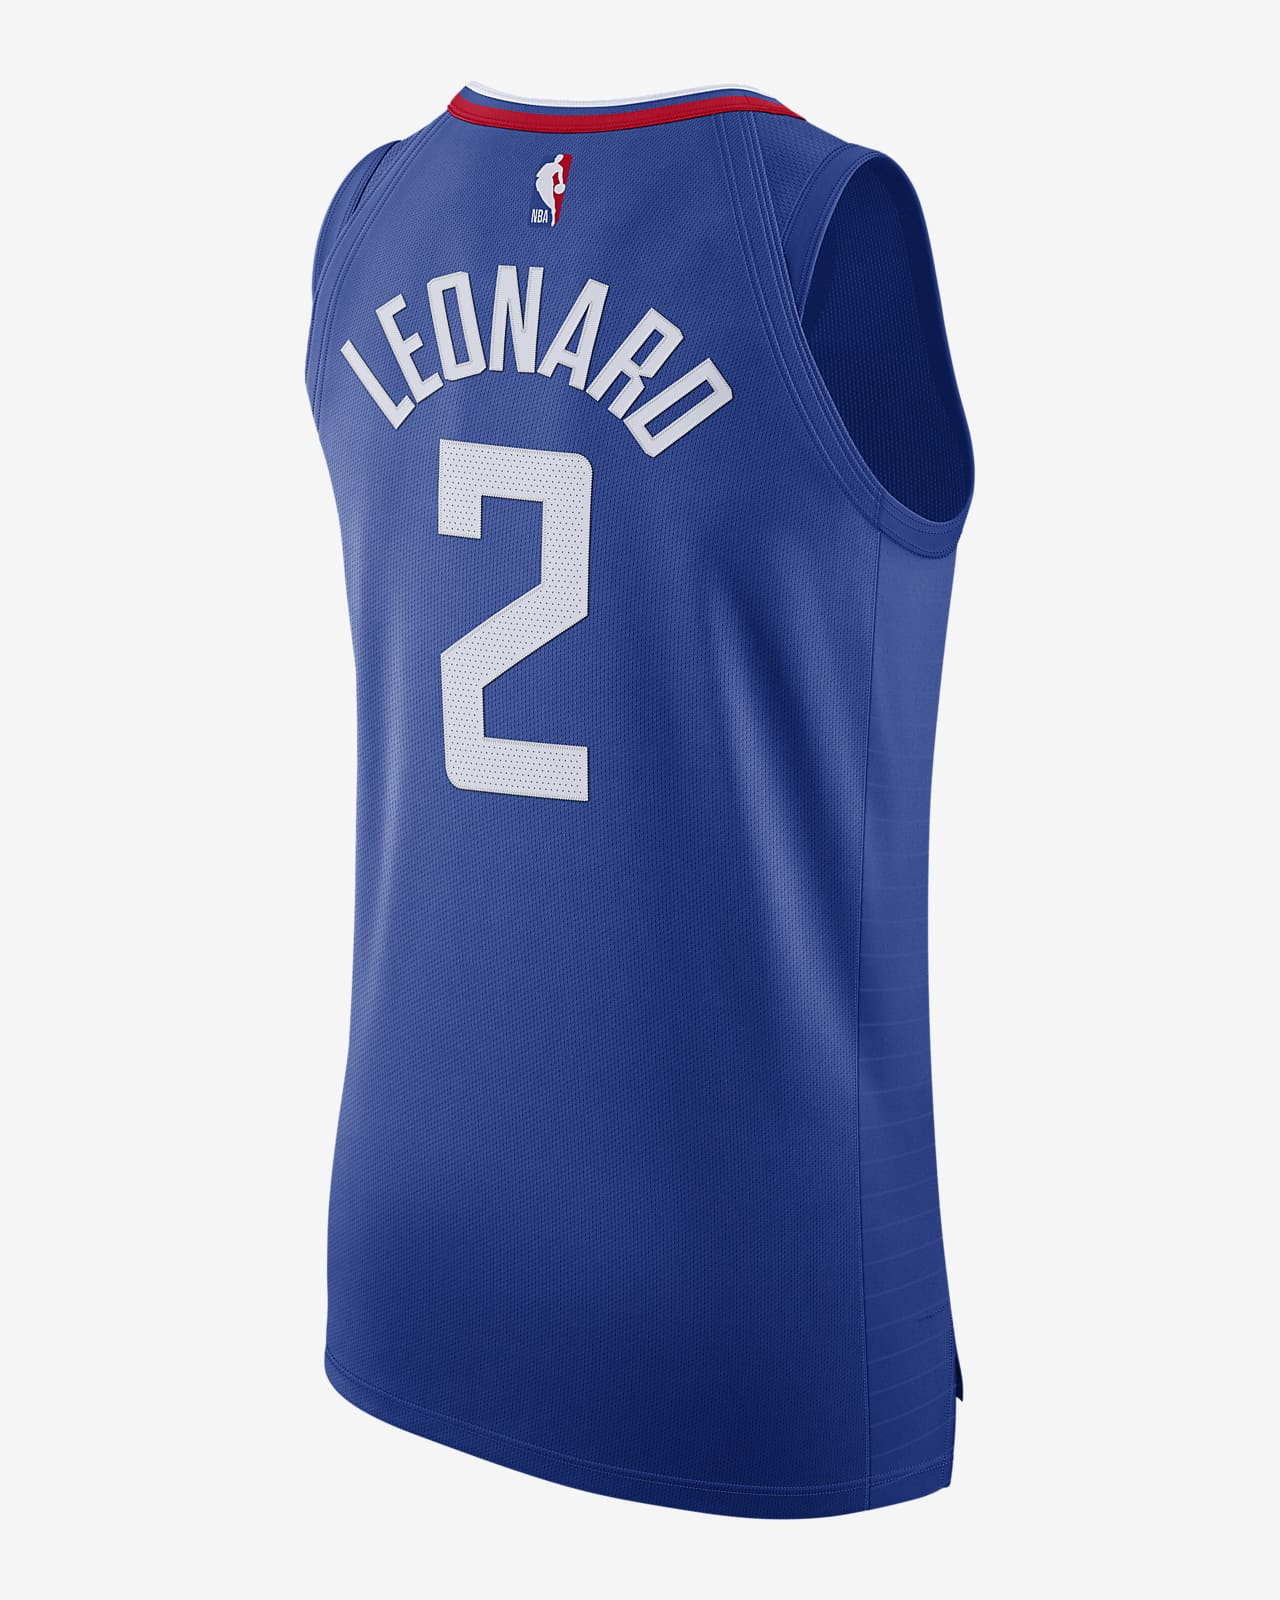 Buy > clippers nba jersey > in stock